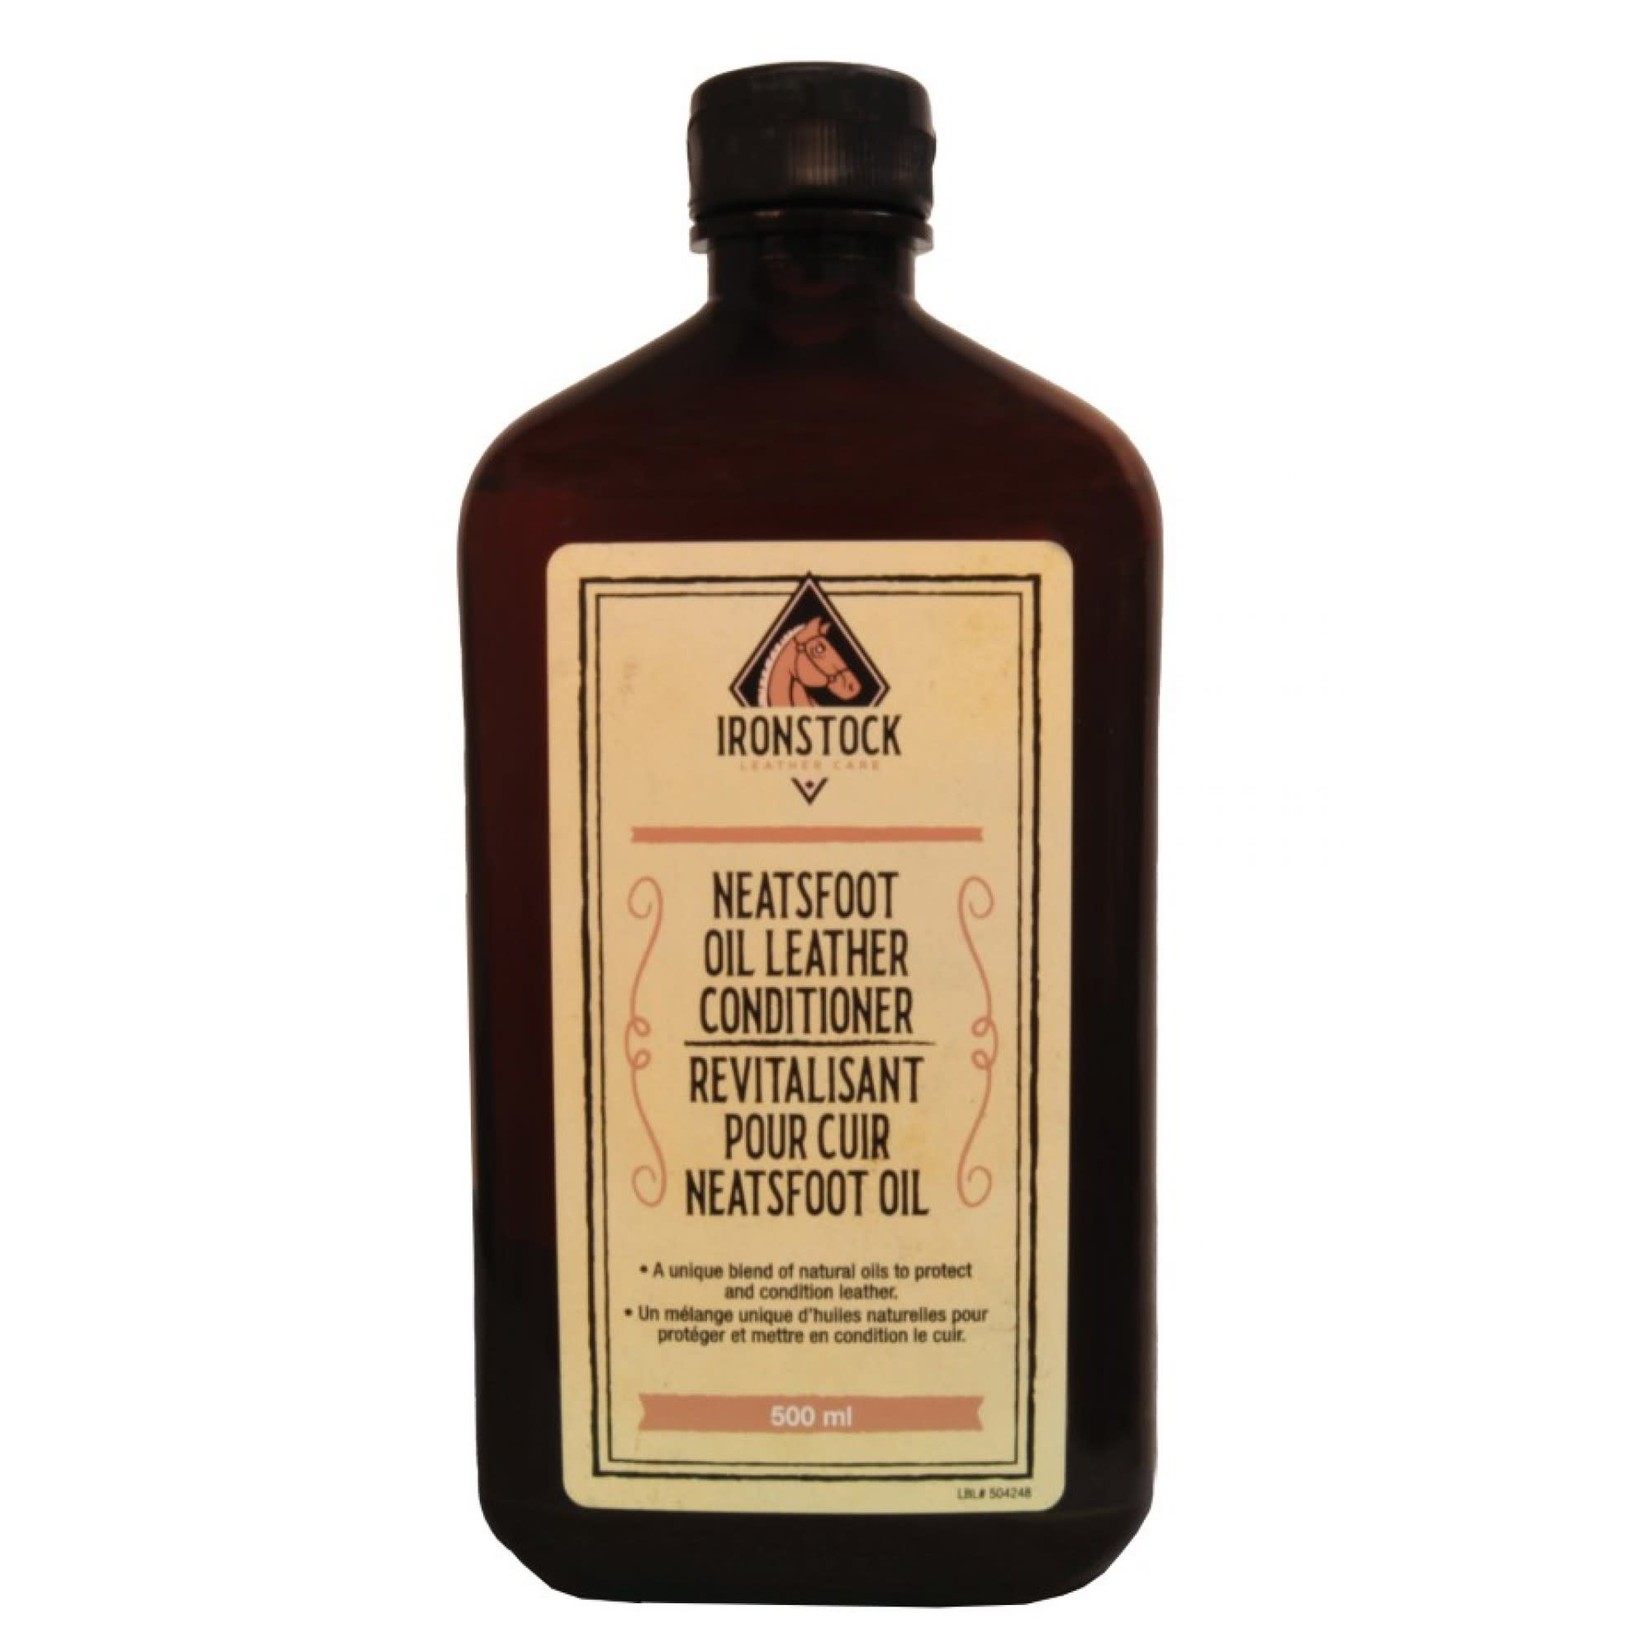 IRONSTOCK Neatsfoot Oil Leather Conditioner